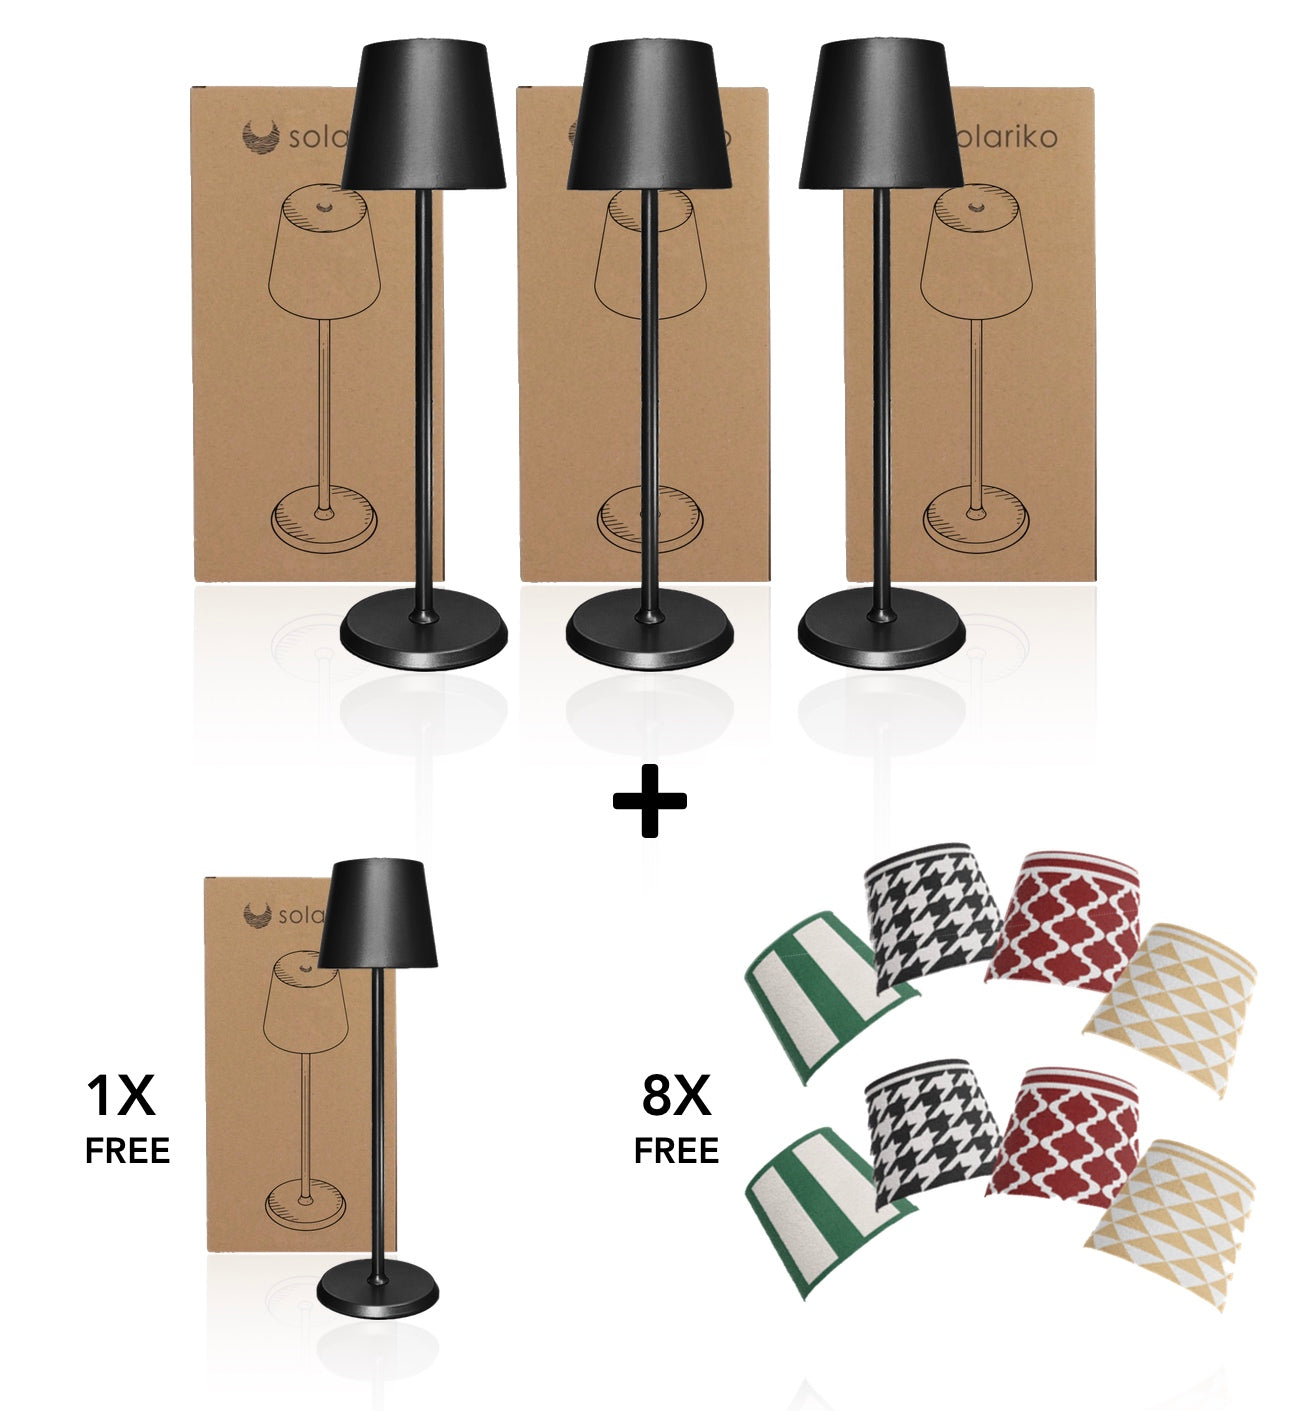 3 Lamps + 1 FREE Lamp + 8 FREE FunCovers ™